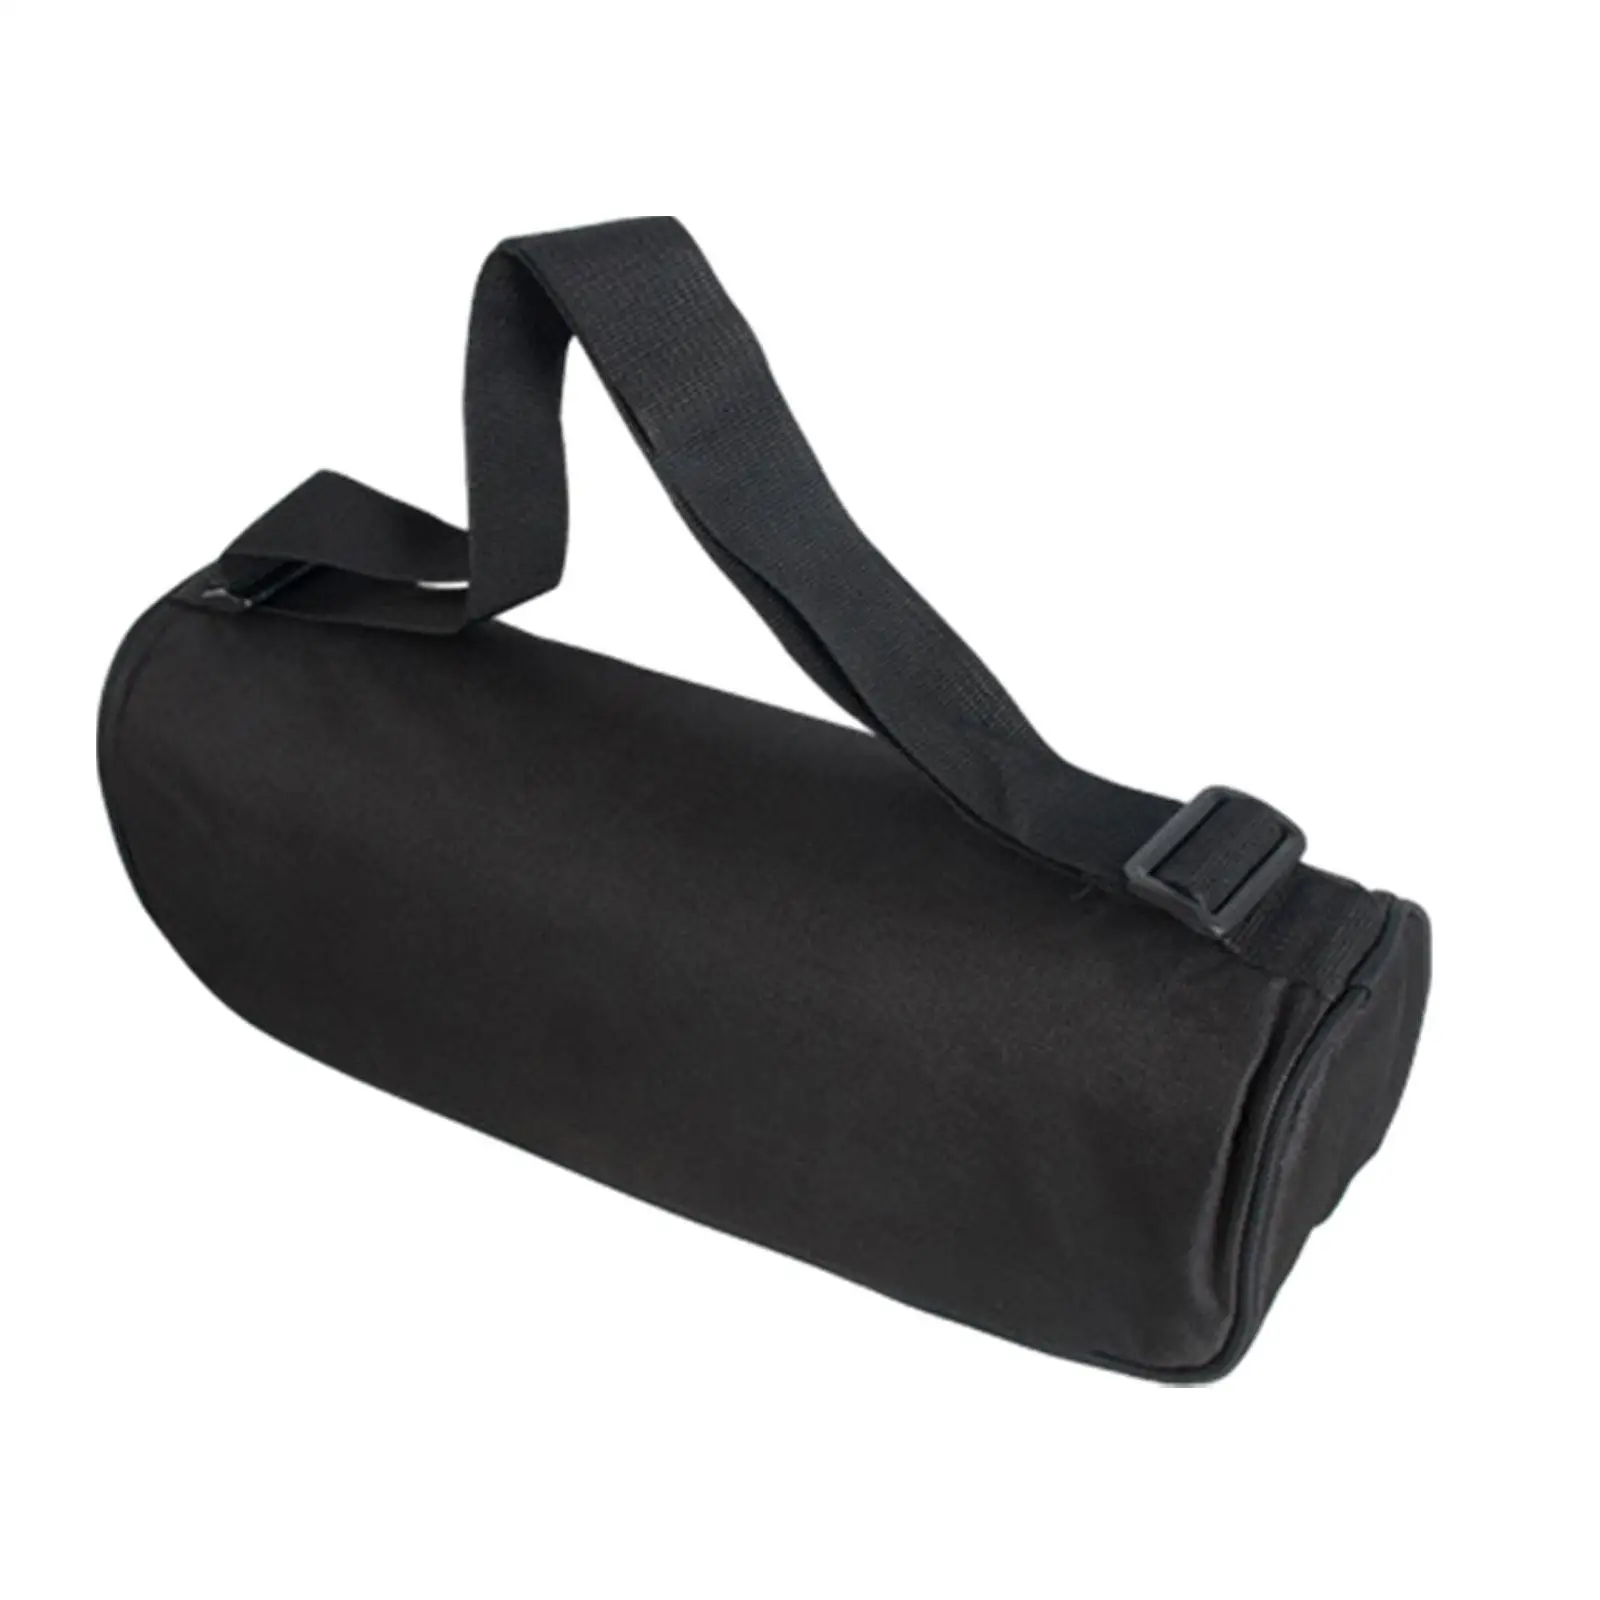 Tripod Carrying Case Multifunctional Photography Accessories Nylon Storage Bag for Monopod Umbrella Speakers Tent Pole Mic Stand